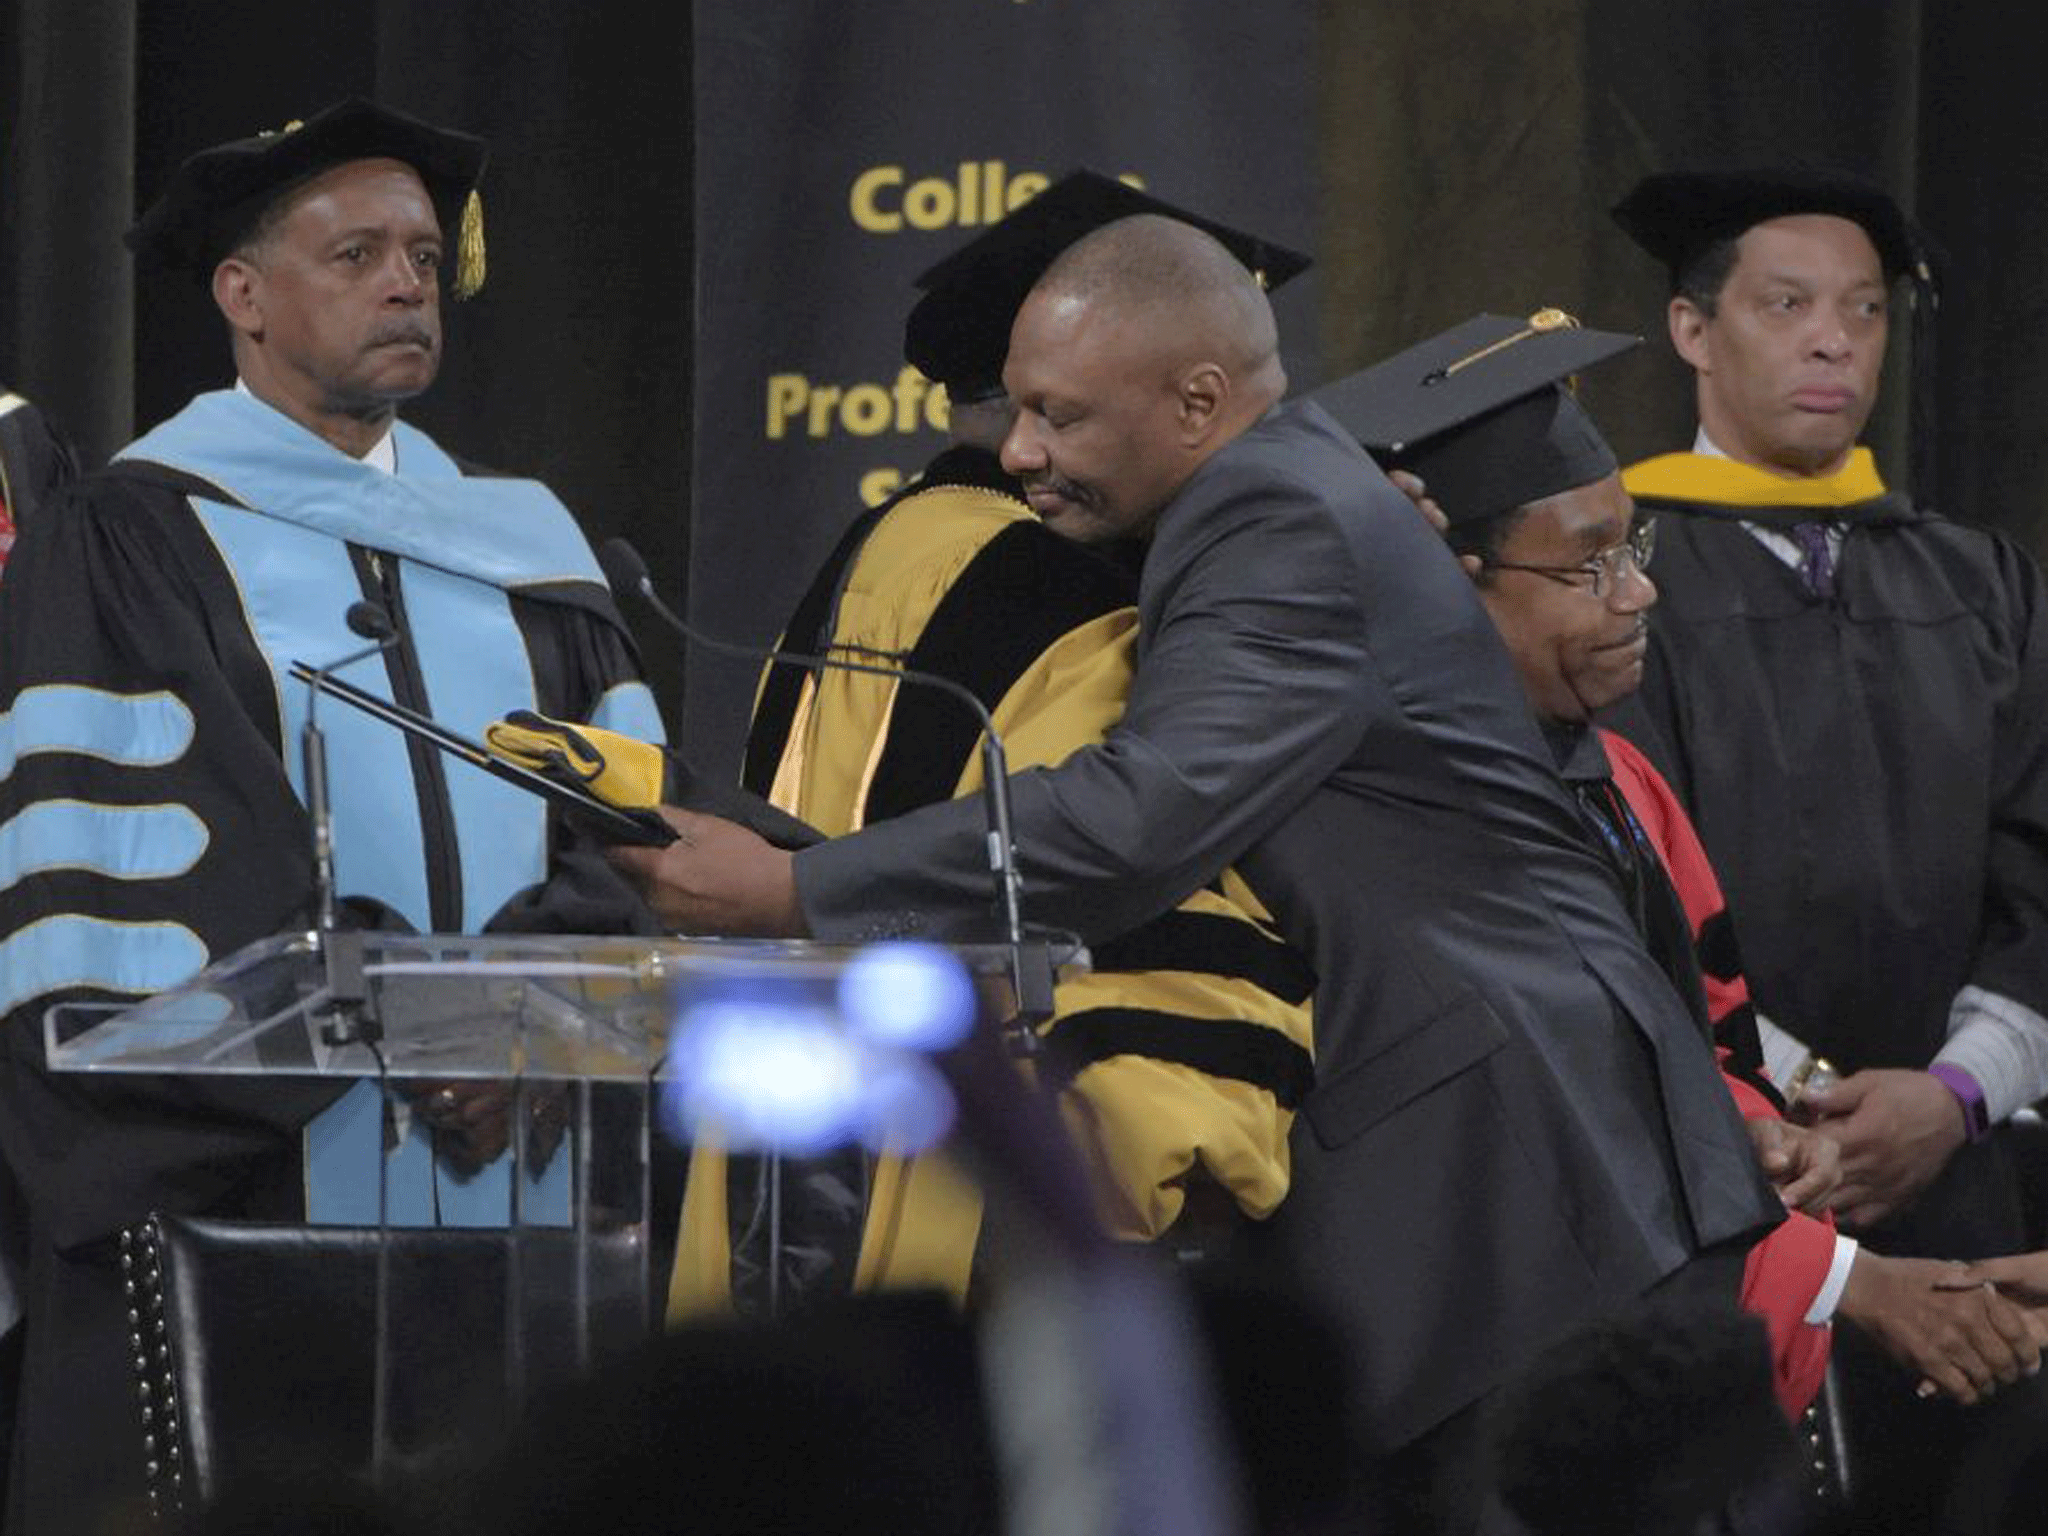 Bowie State University President Dr Mickey L. Burnim hugs Richard Collins Jr., father of Richard Collins III, at the school's graduation ceremony.